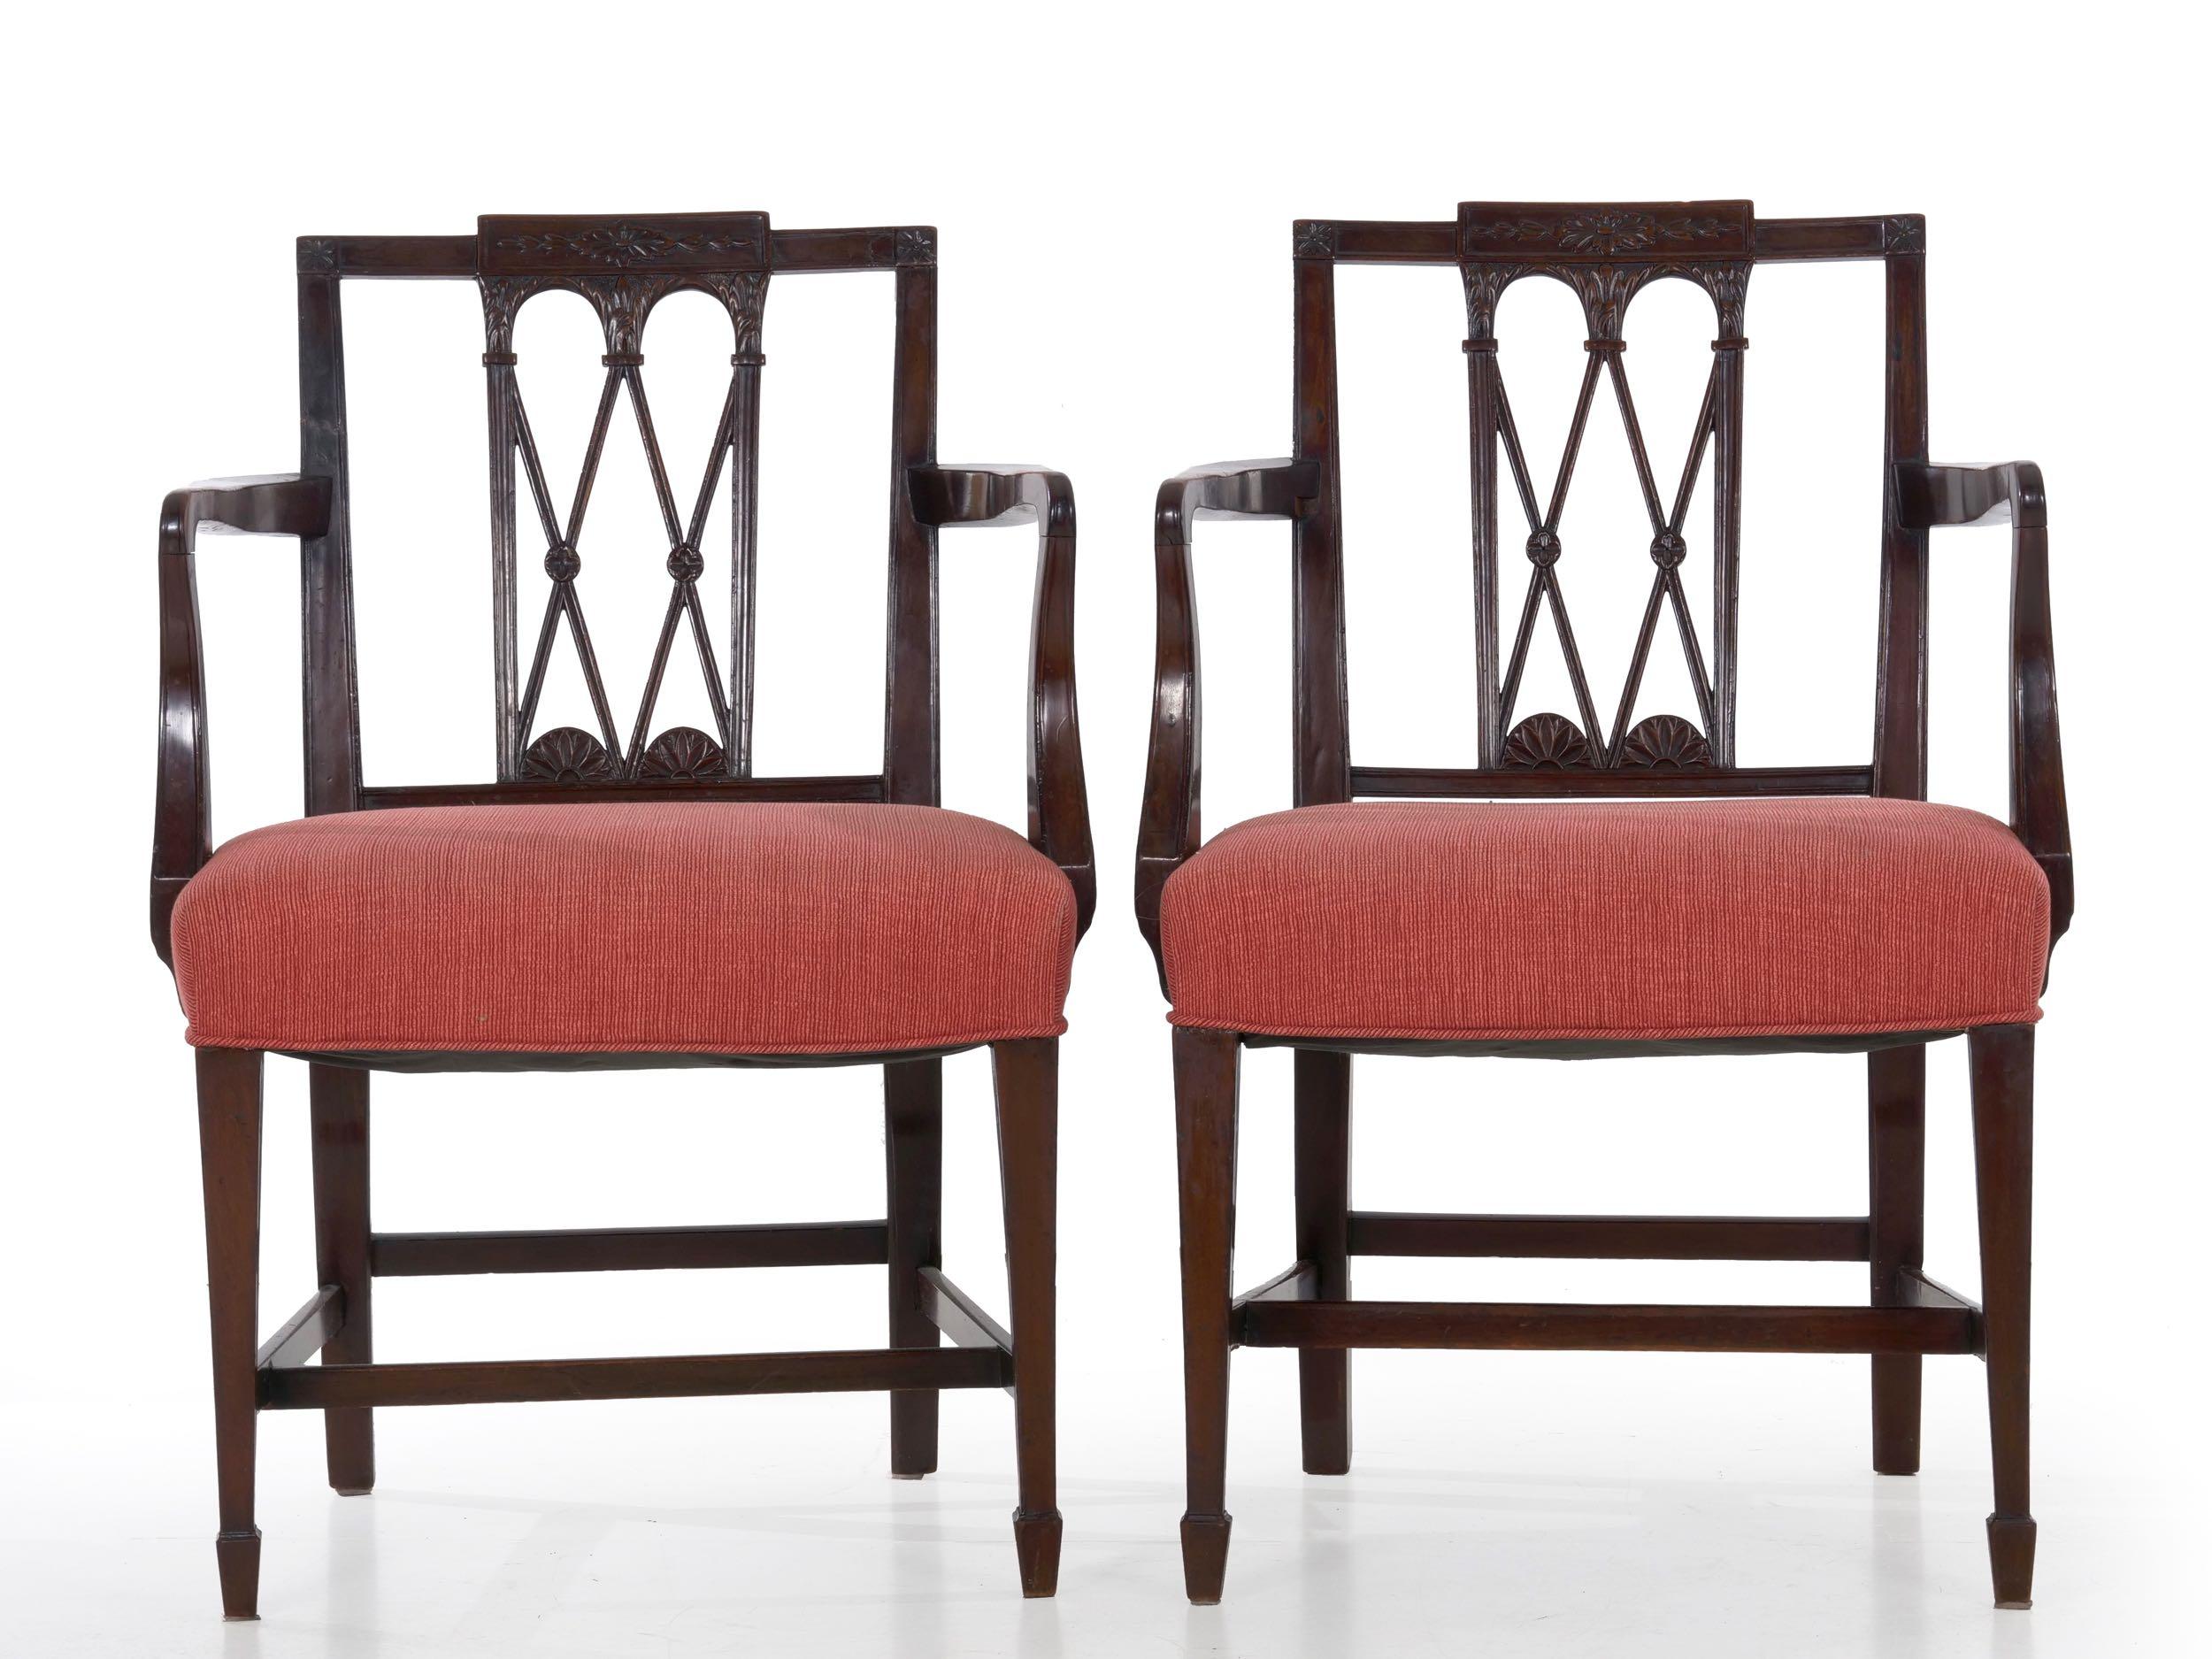 A beautiful early set of chairs, it is comprised of five period chairs and three very careful and convincing replicas from the early part of the 20th century. Each is executed in a dense mahogany with a ruby-cognac finish that has delightfully worn